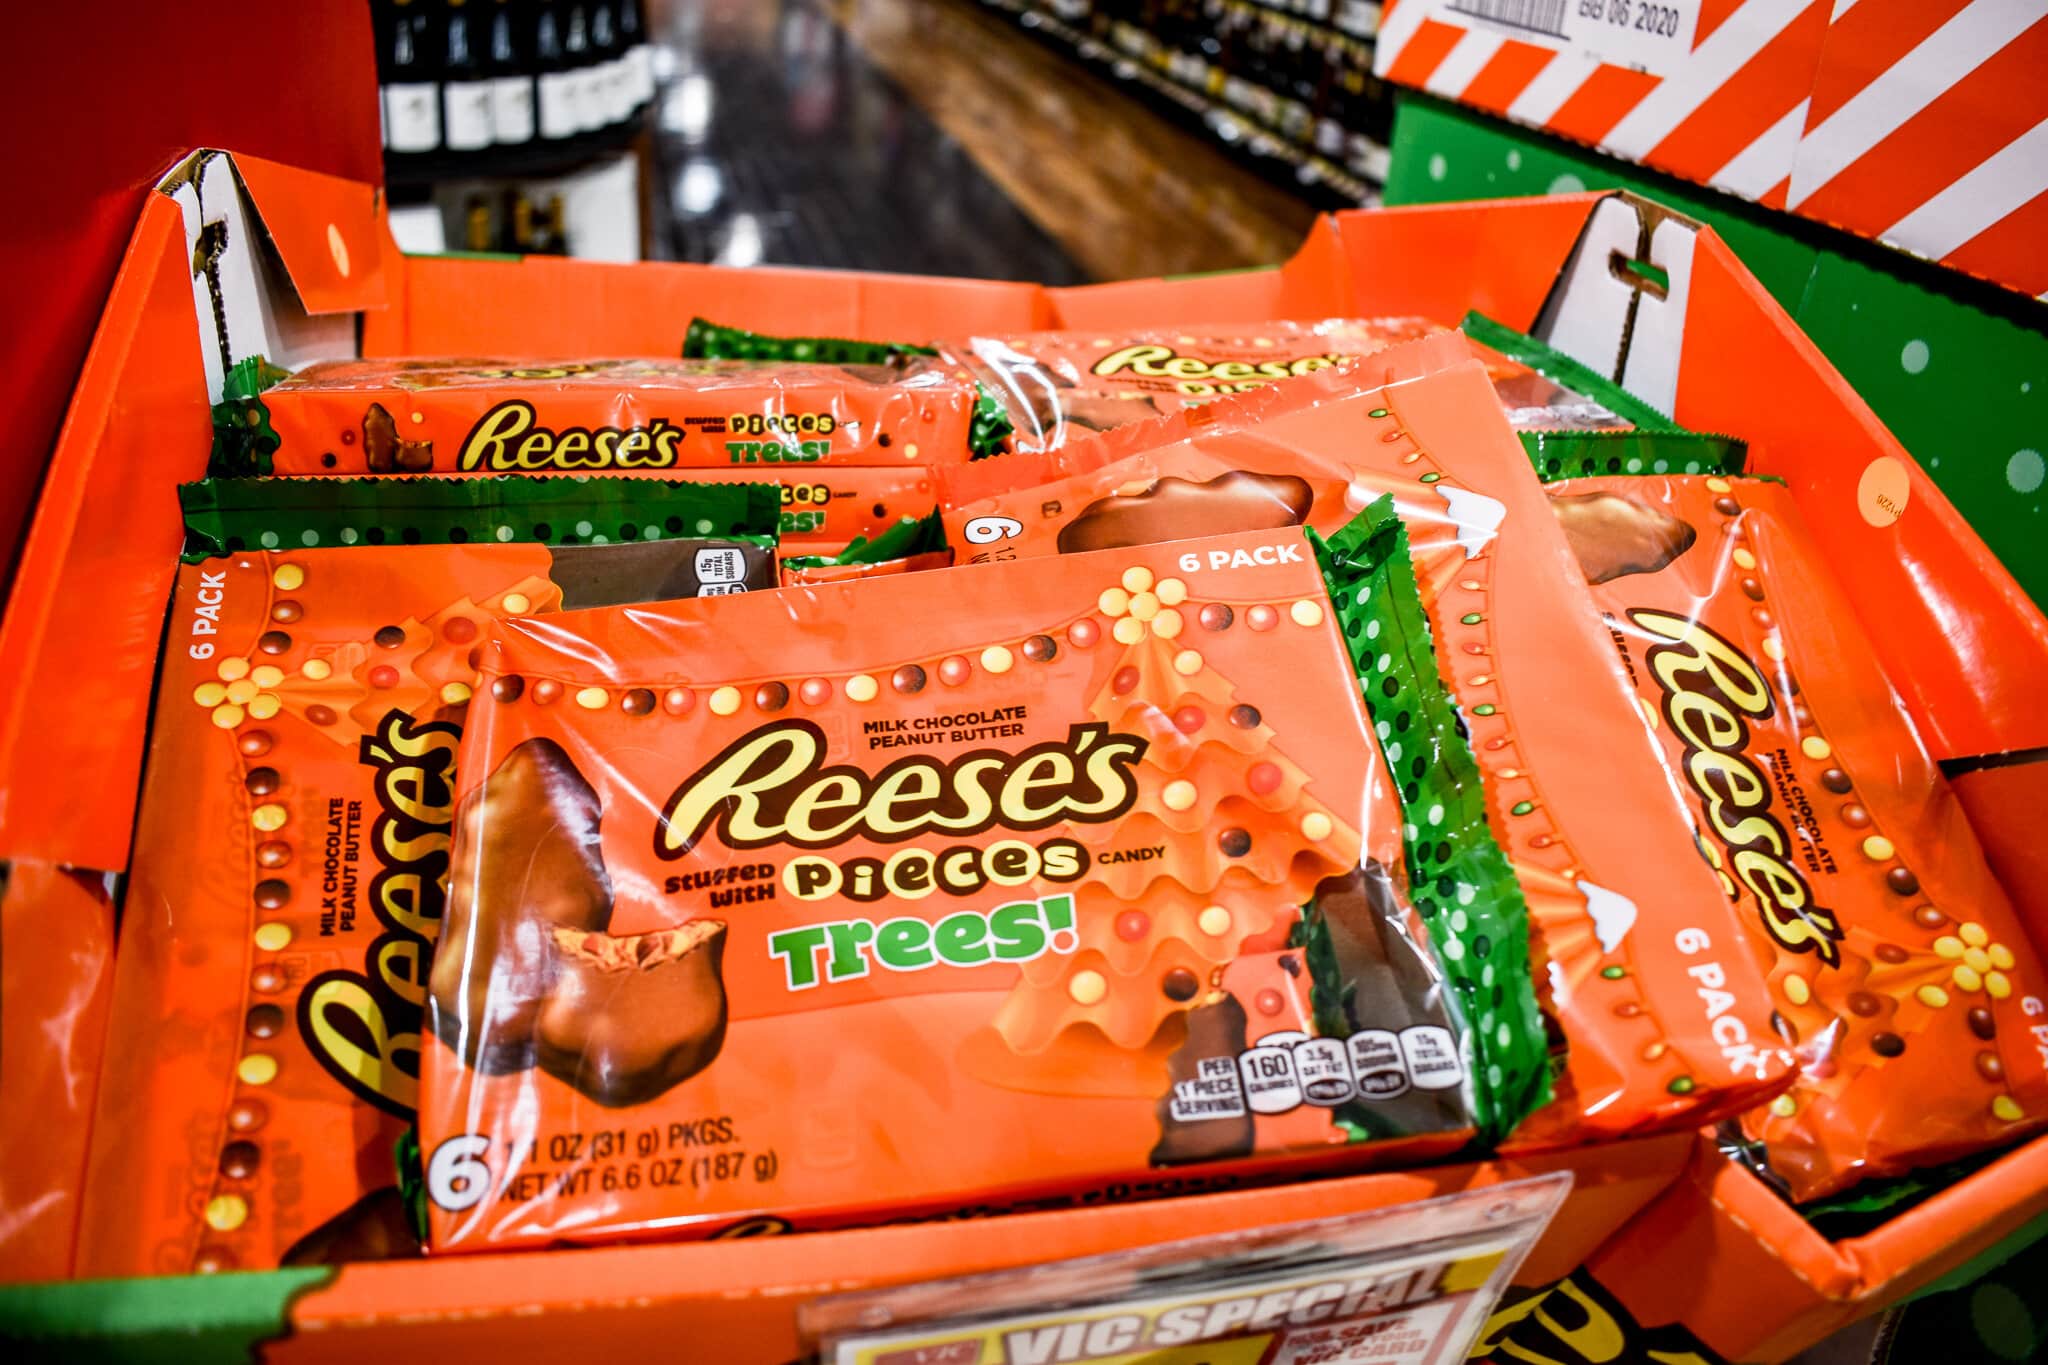 Peanut butter lovers can still get their peanut butter fix during the holiday season with the very festive Reeses Pieces trees.